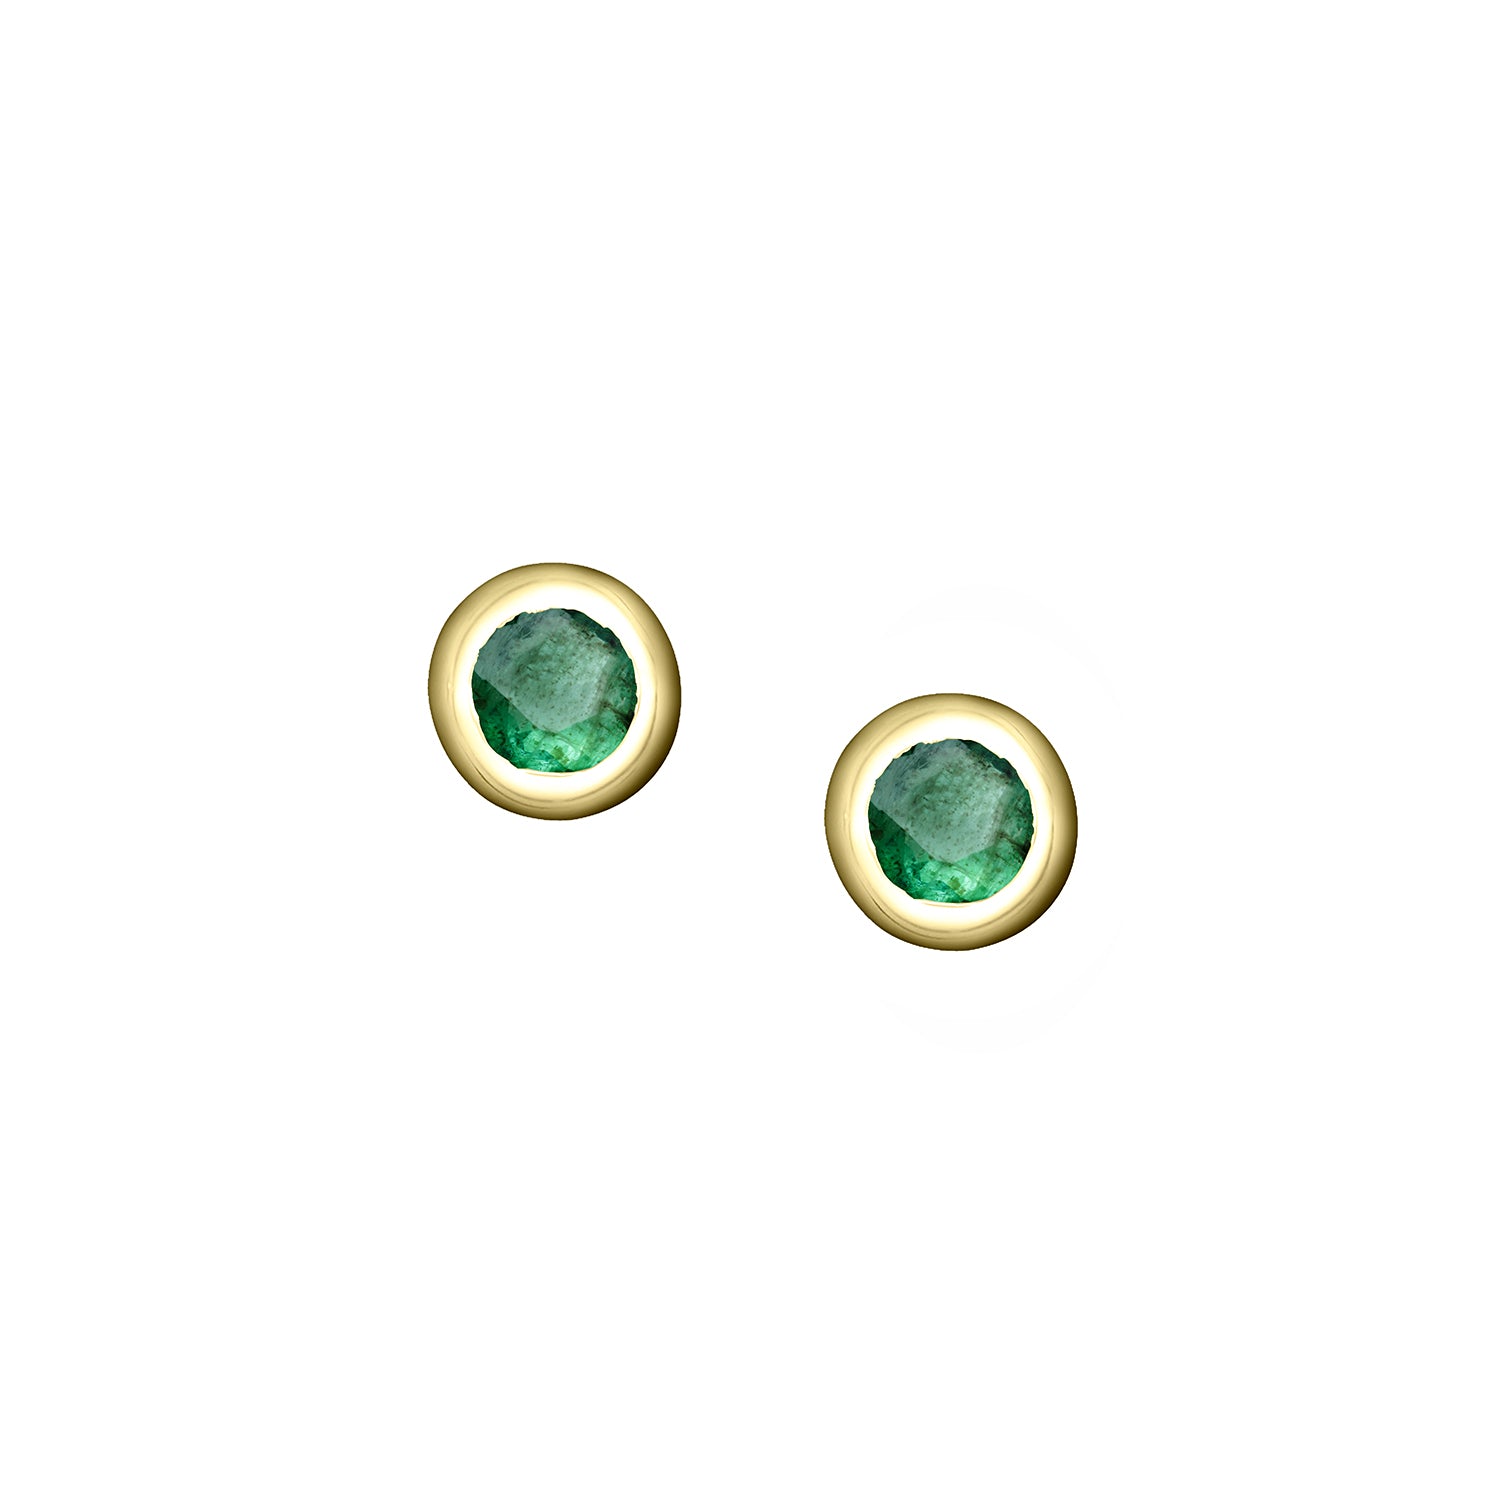 Polished Gold Vermeil Crescent Moon Birthstone Earrings - May / Emerald